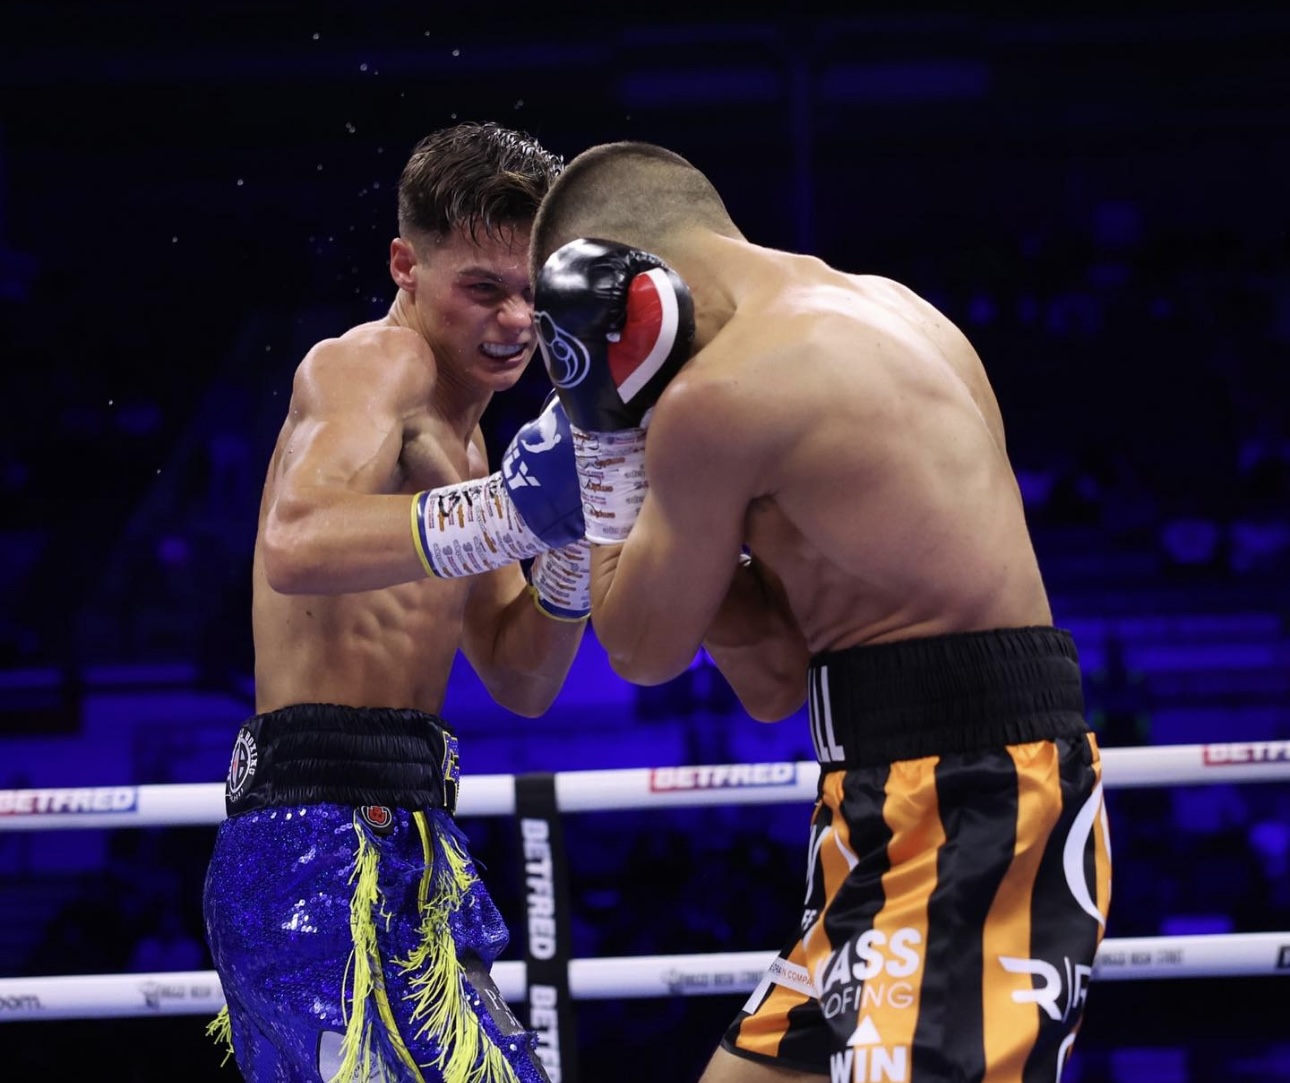 Price beats Coghill to take another step in his career – World